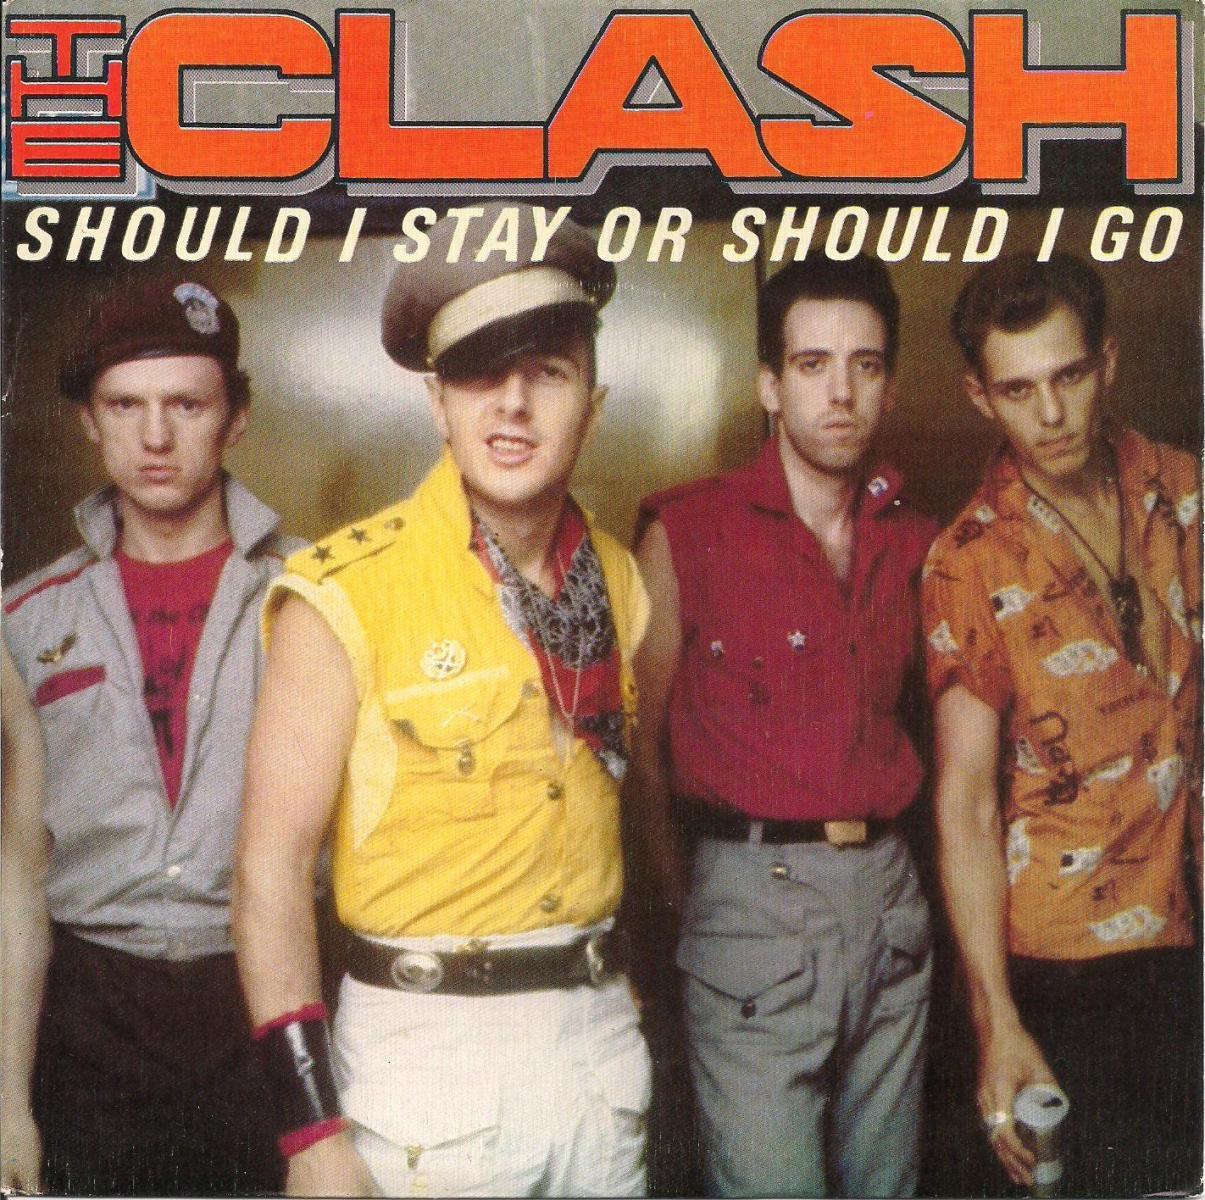 The Clash: Should I Stay or Should I Go (Music Video)